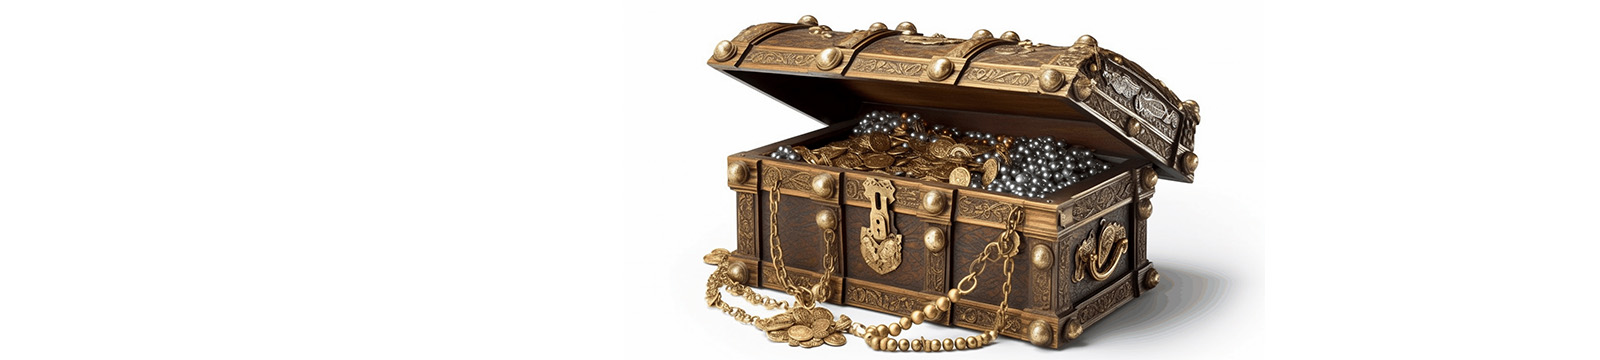 Realistic graphic of a wooden chest filled with gold and jewels.